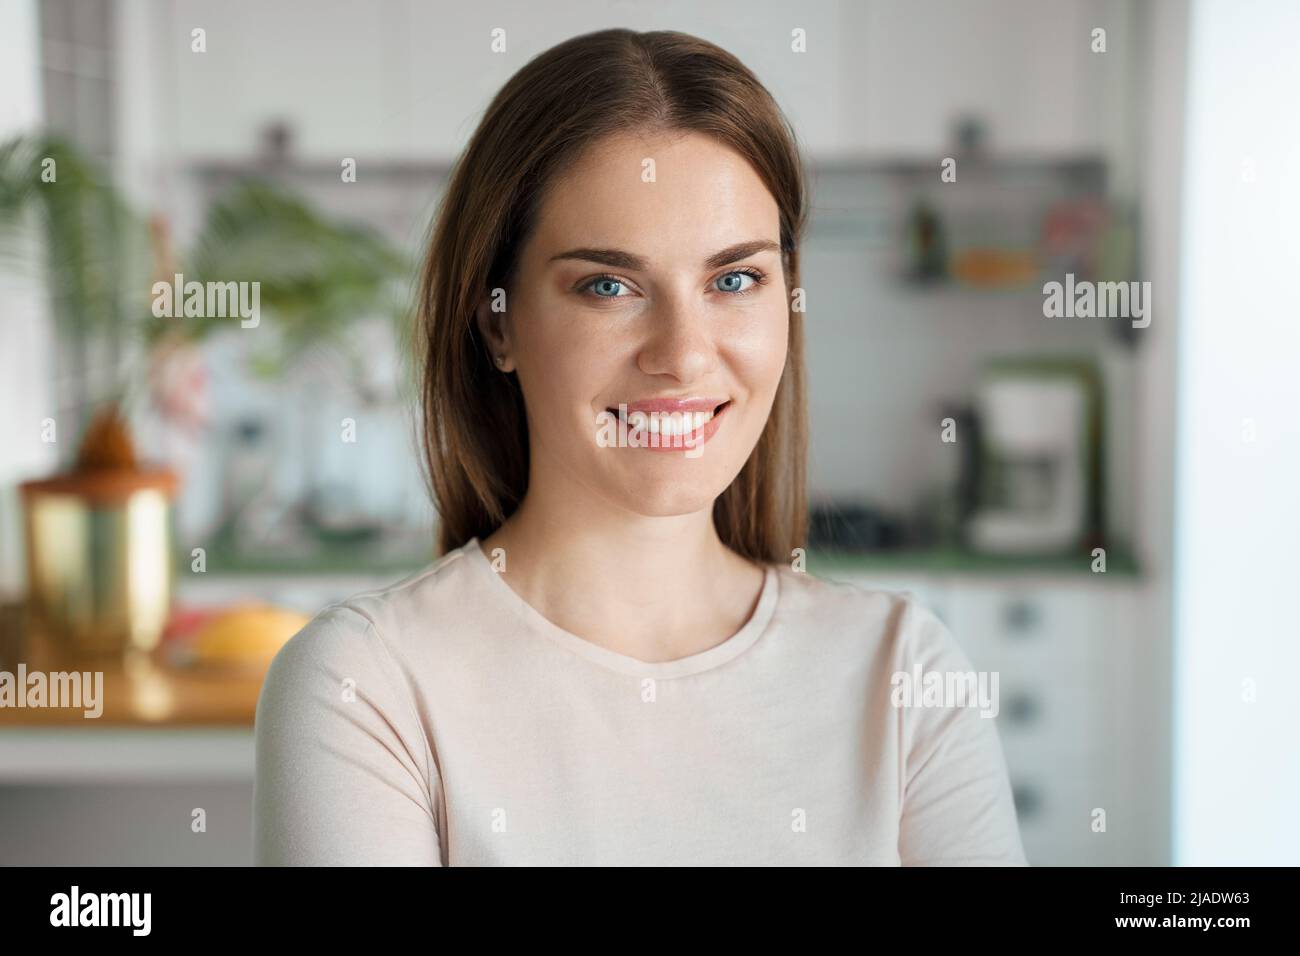 Portrait of young smiling woman at home office Stock Photo